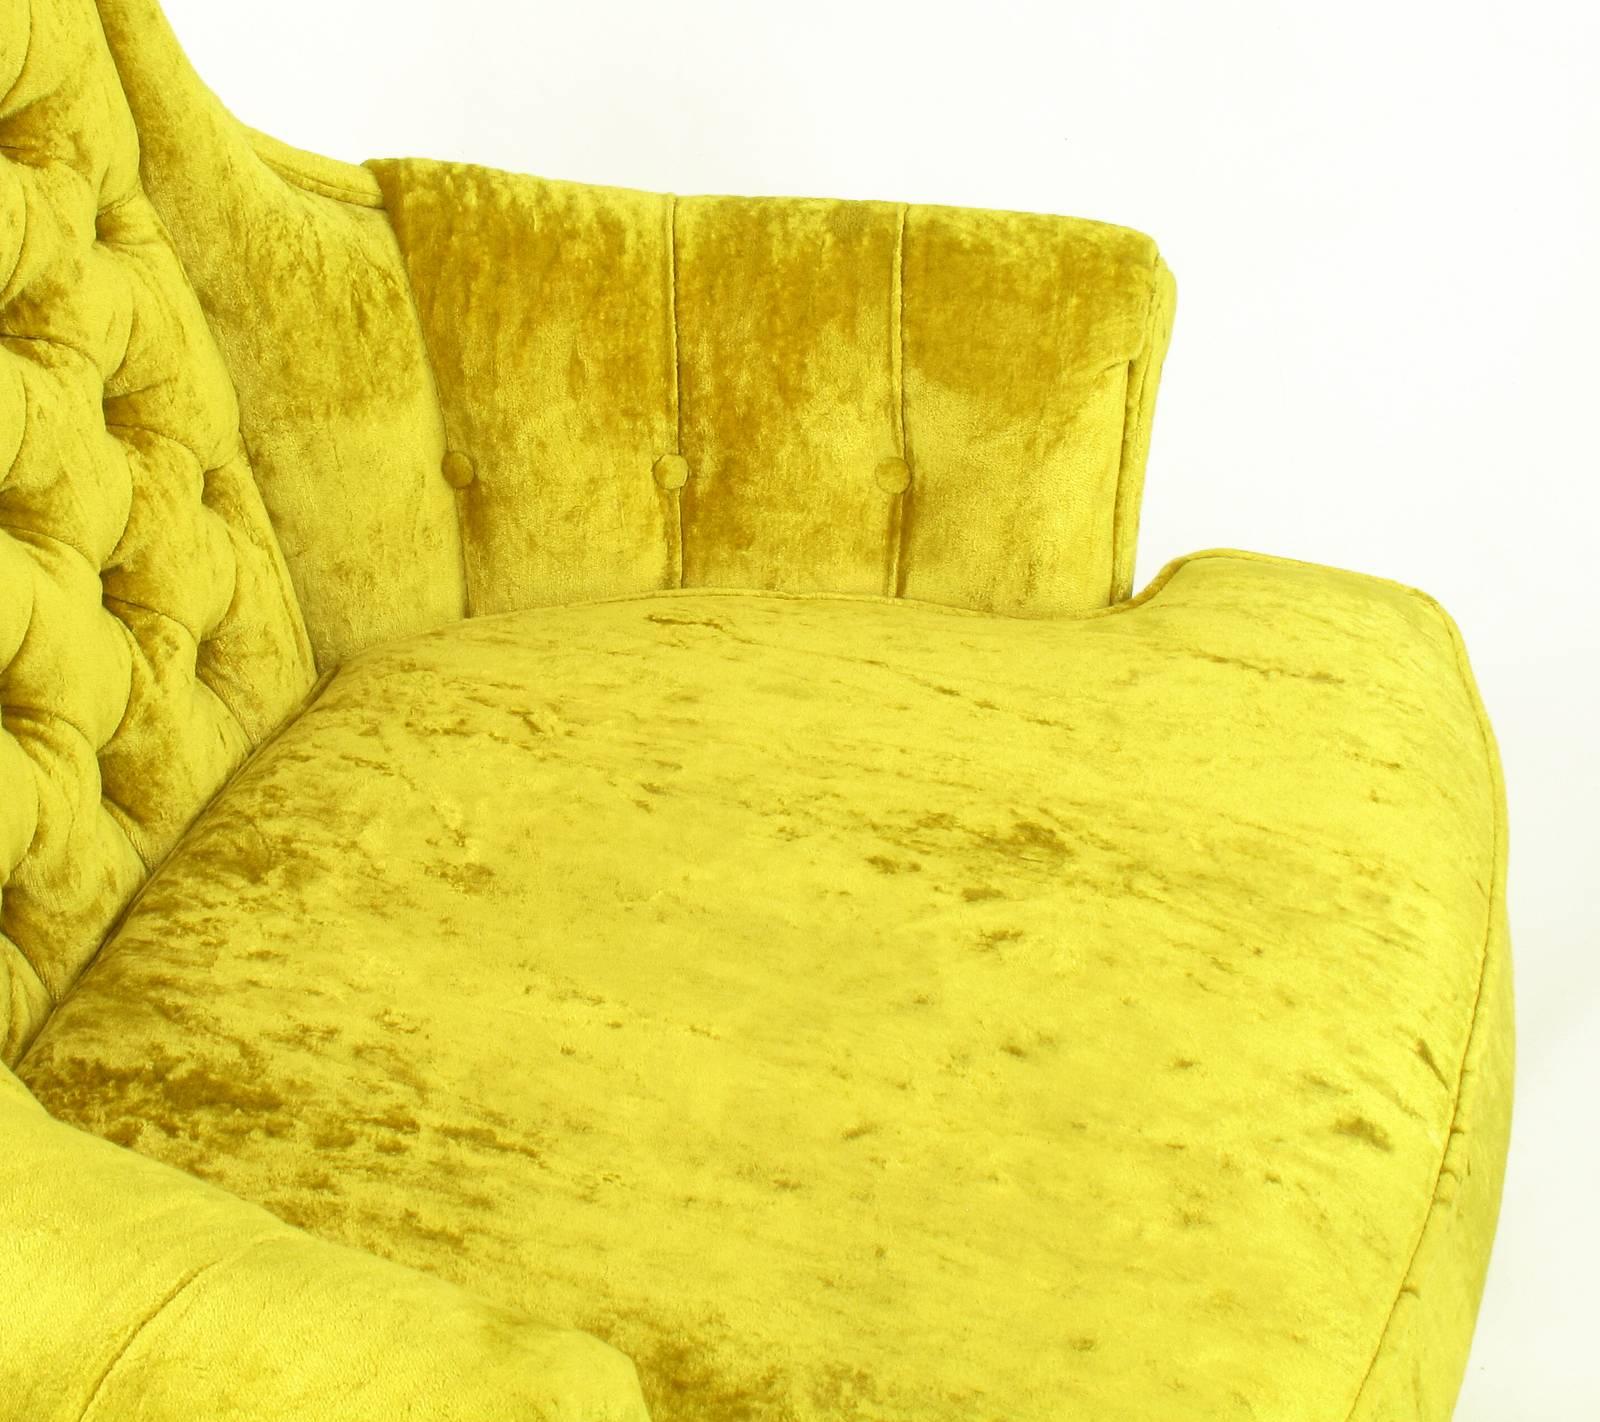 American Tall Back Sinuous Lounge Chairs in Gold Crushed Velvet, circa 1960s For Sale